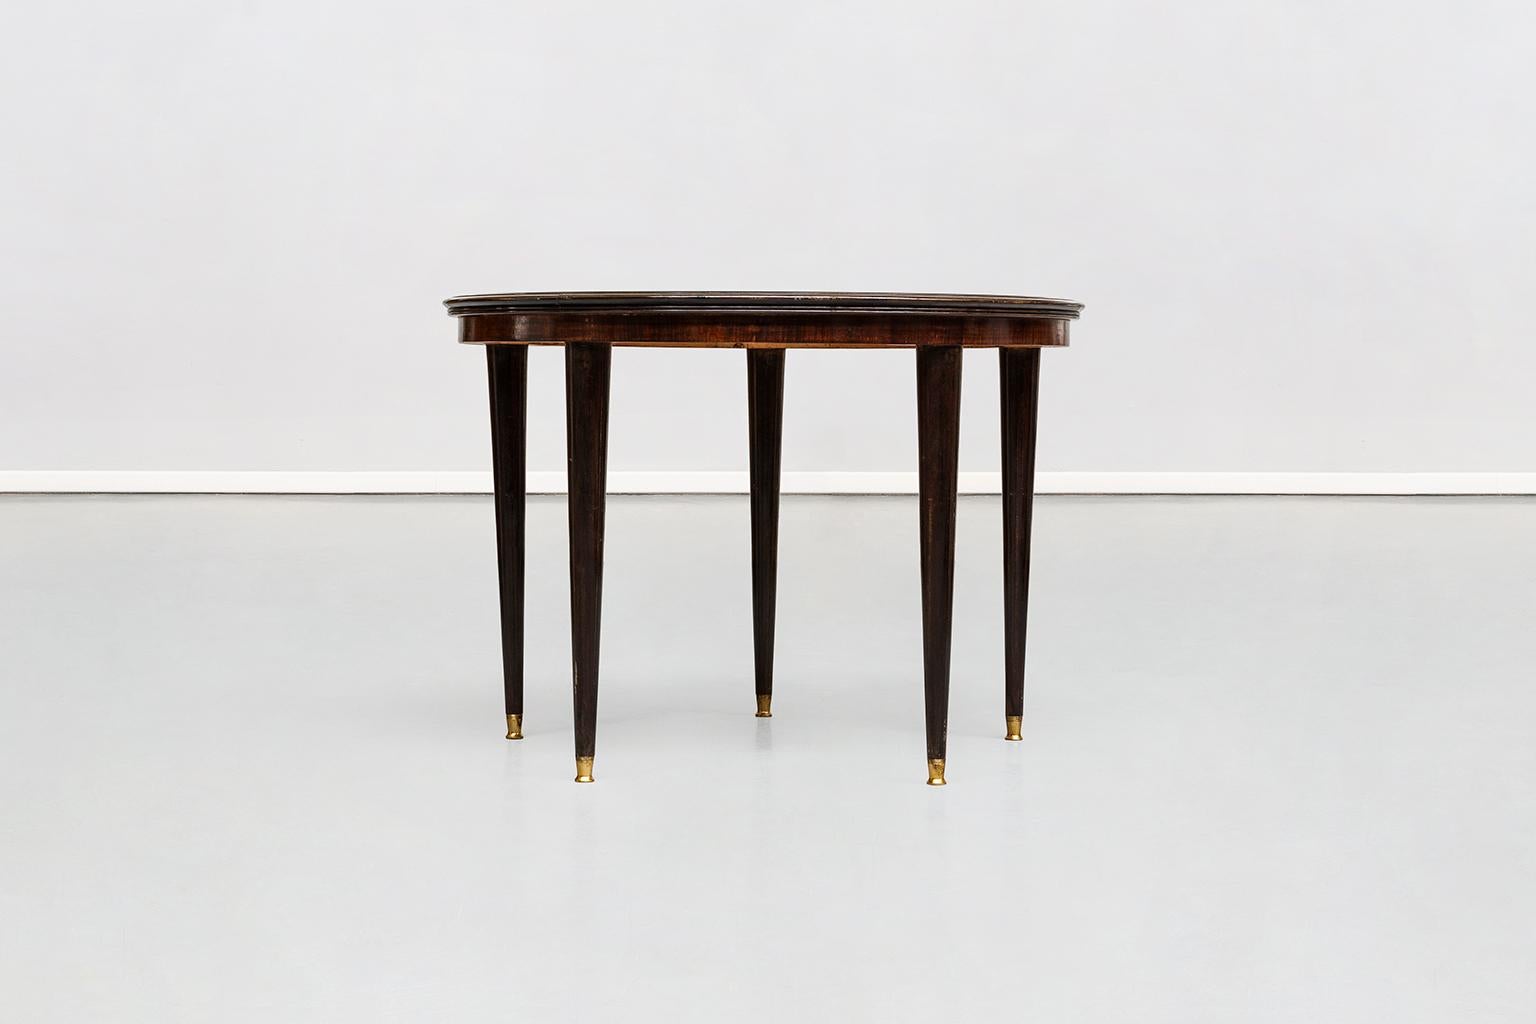 Italian rosewood round five legs dining table in the style of Dassi, 1950s
Italian rosewood dining table in the style of Dassi on high conical legs with brass details and round tabletop with original glass top. Absolutely uncommon the presence of